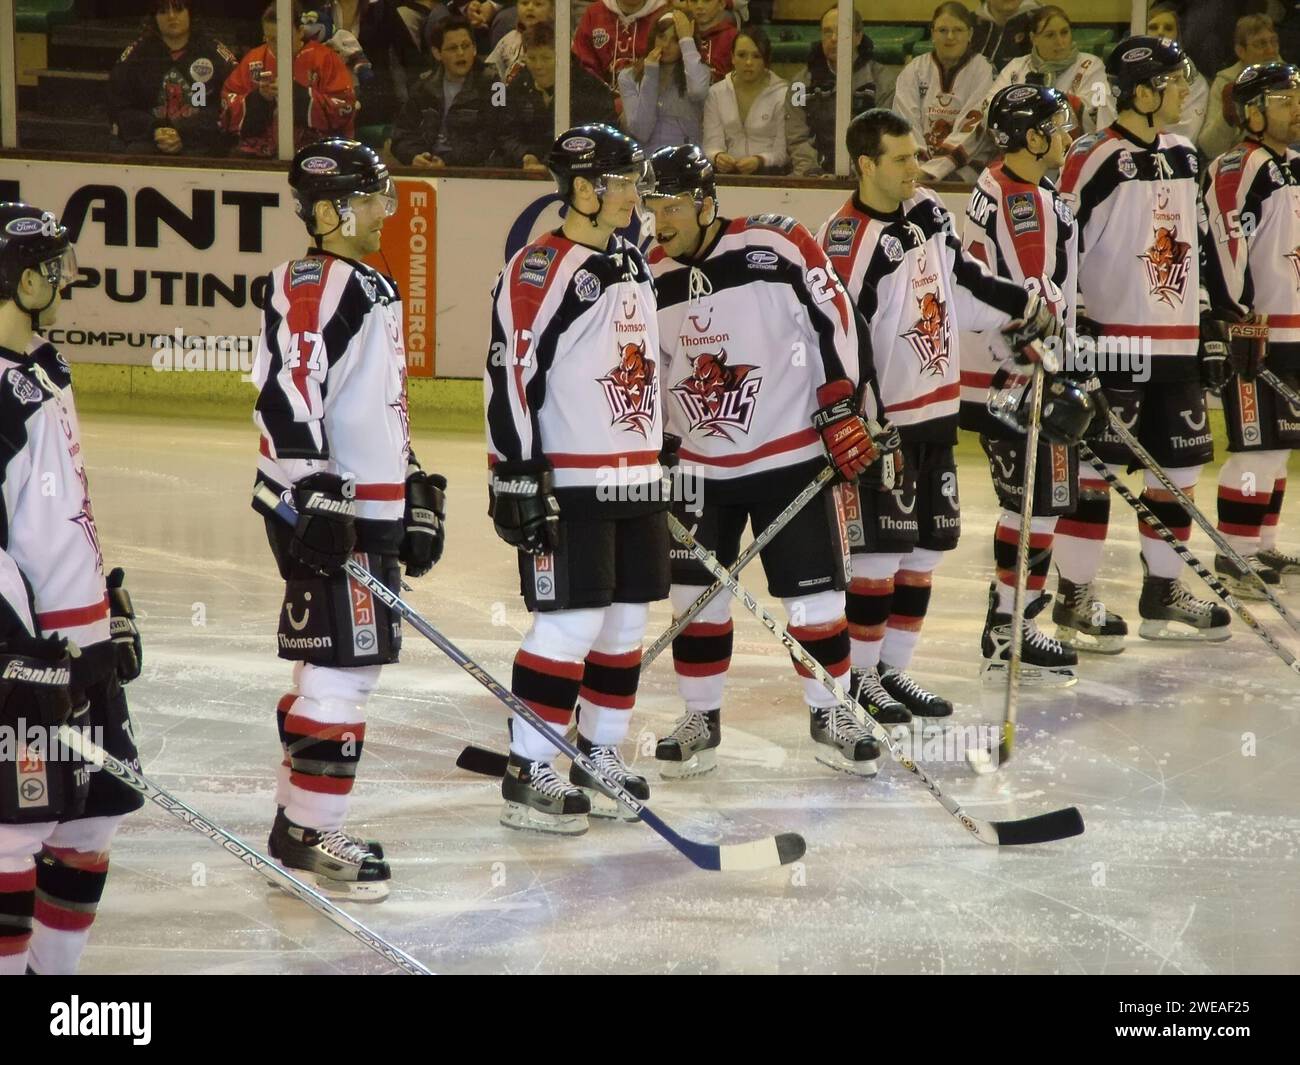 Cardiff Devils Ice hockey team players at the Wales national ice rink in Cardiff Wales UK 18th march 2006 Stock Photo